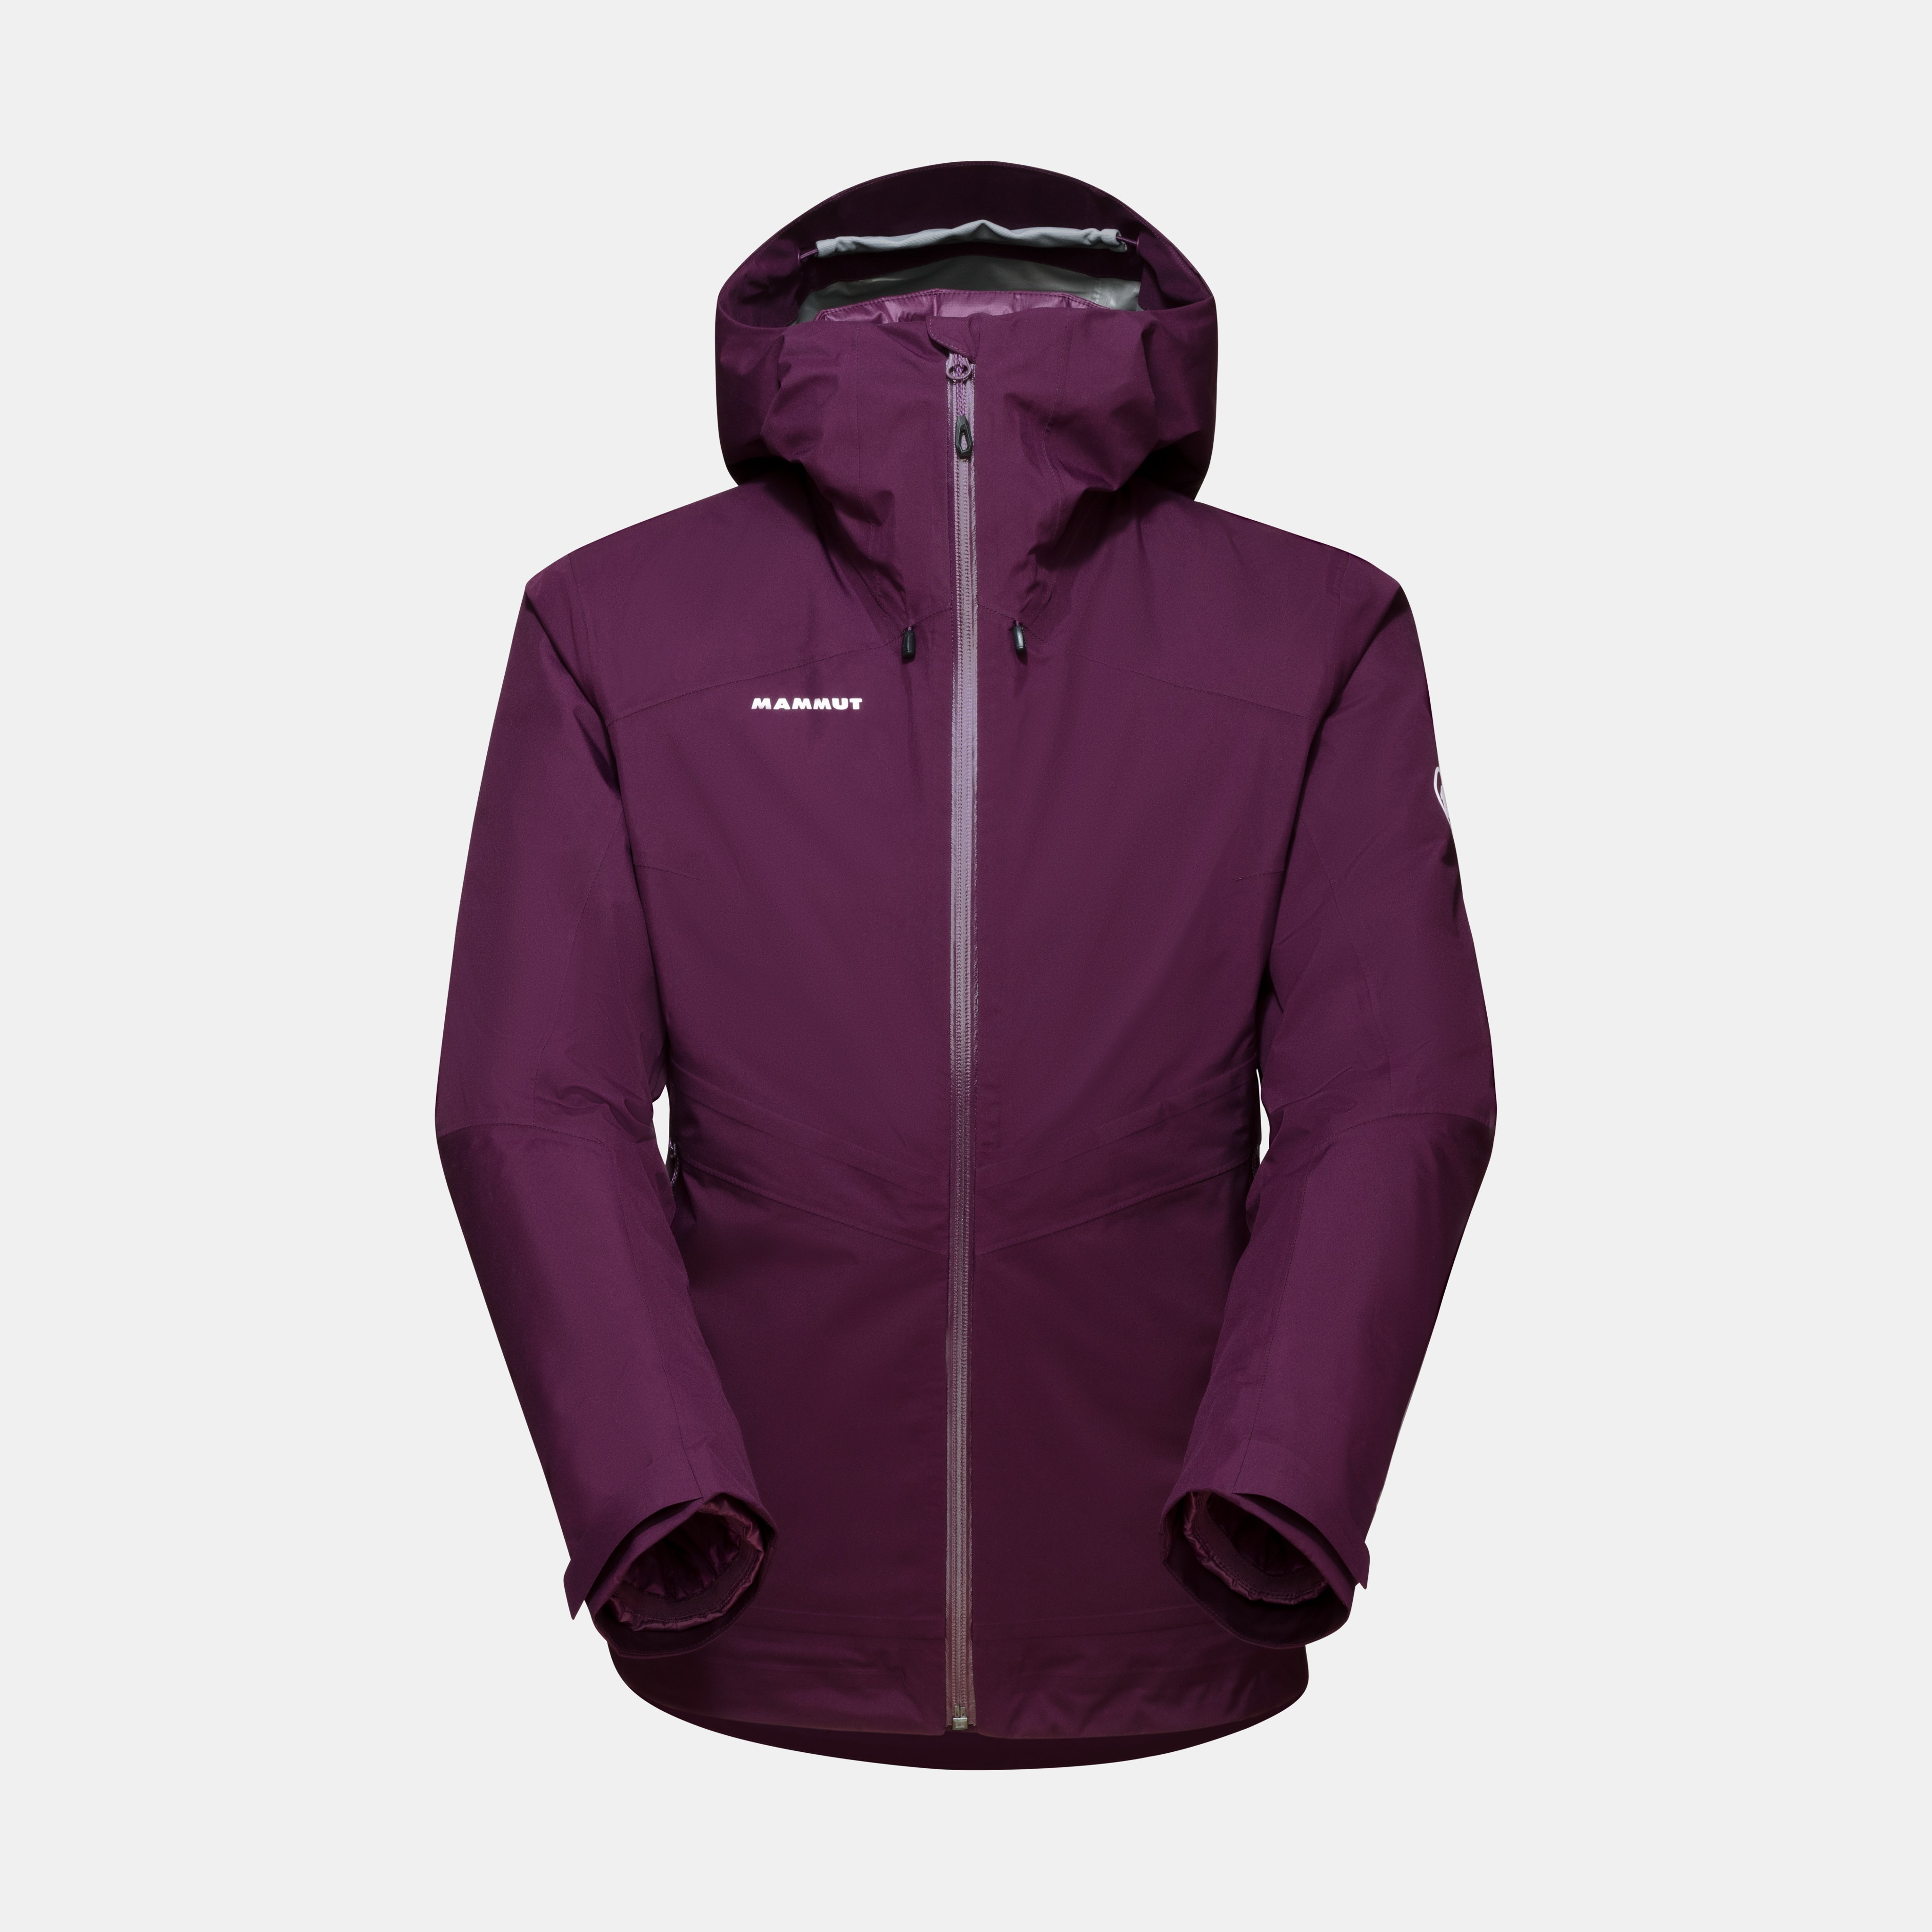 Convey 3 in 1 HS Hooded Jacket Women product image